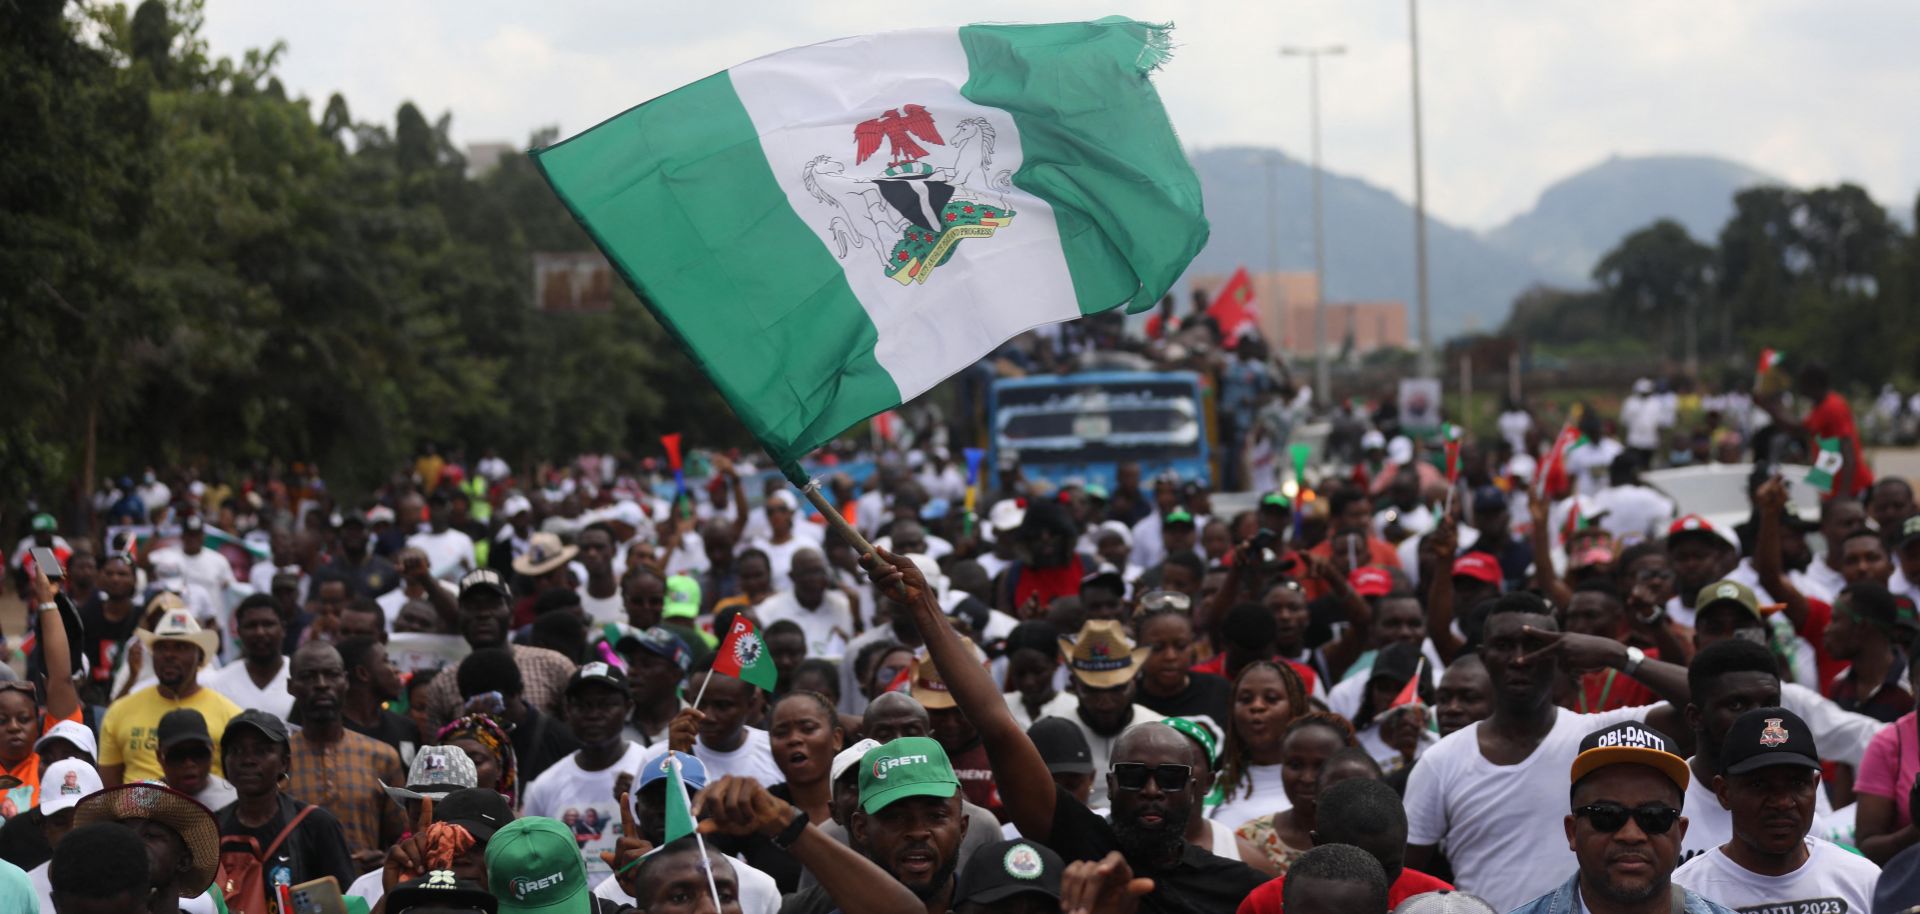 The Nigerian flag is waved above a crowd at a political rally for Labor Party candidate Peter Obi in Abuja, Nigeria, on Sept. 24, 2022. 